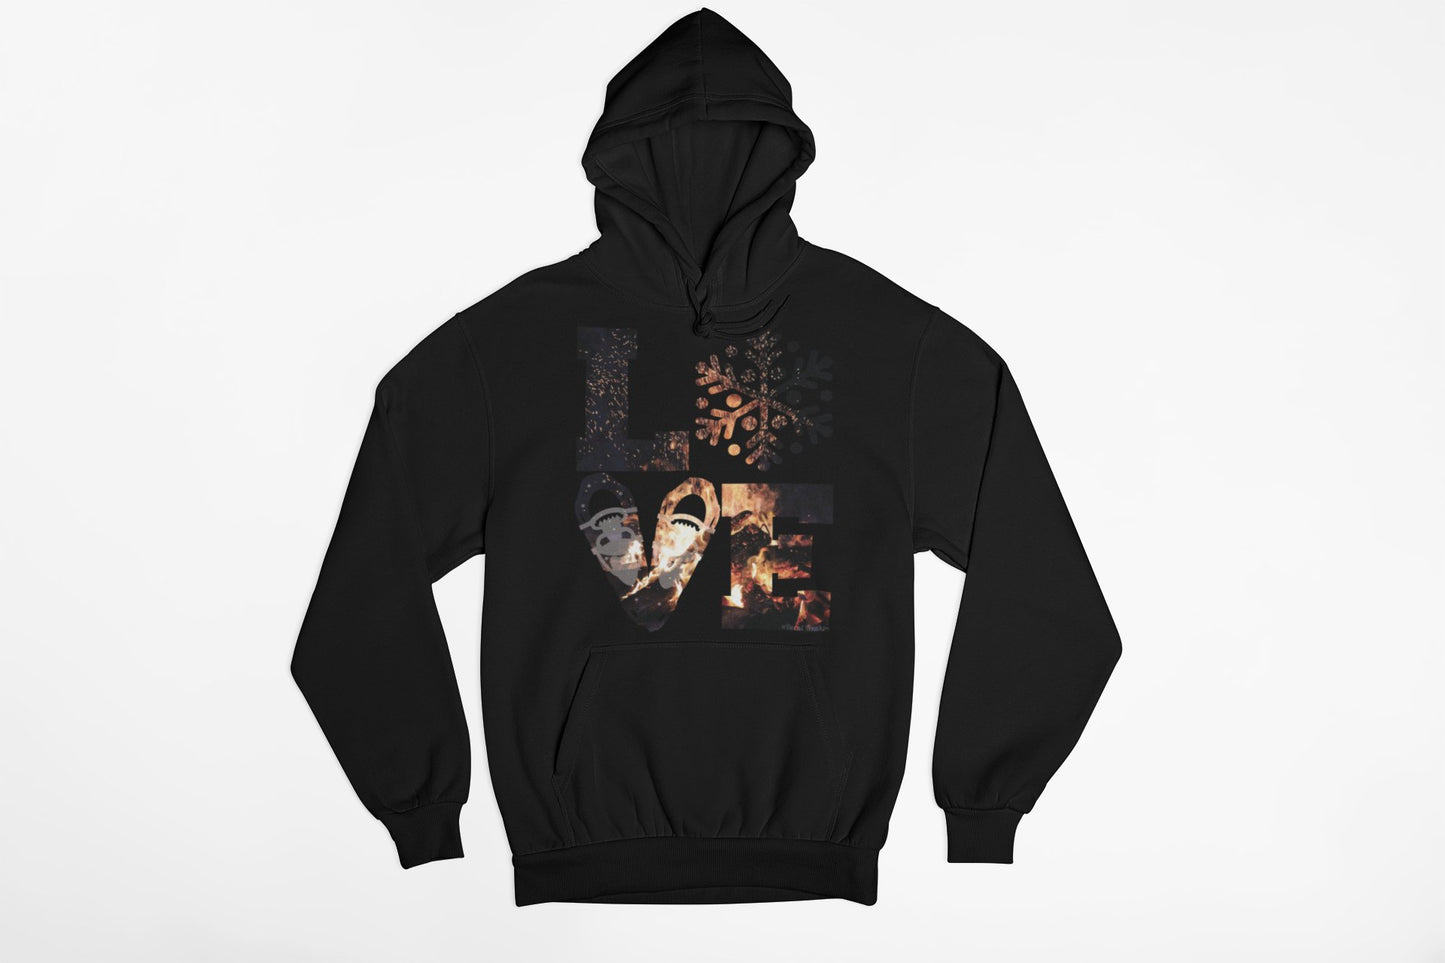 LOVE Snowshoe Crackling Fire - T-Shirt, Long Sleeve, Crewneck, Hoodie With FREE Decal - DecalFreakz